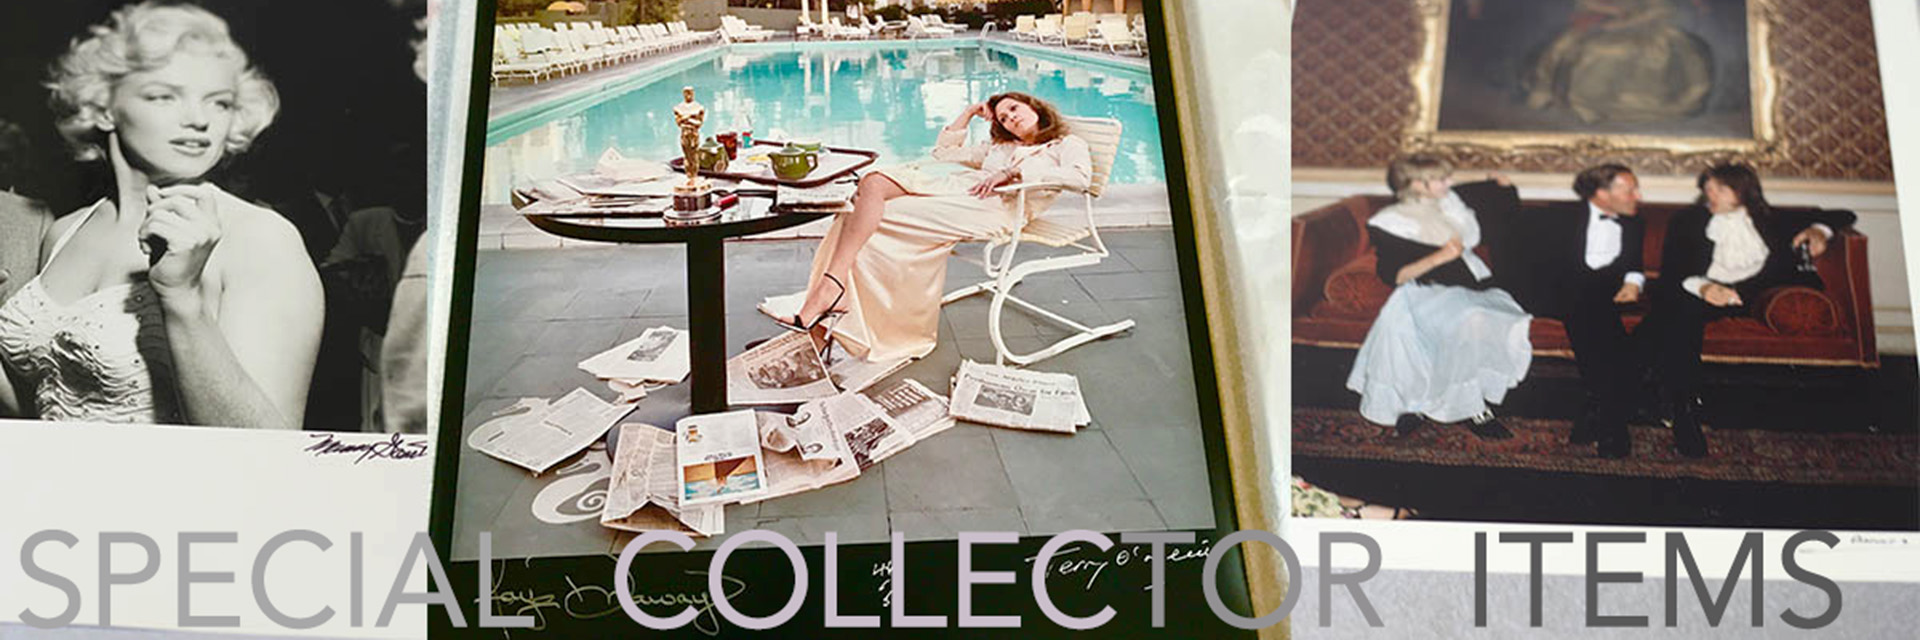 SPECIAL COLLECTOR PRINTS BY MURRAY GARRETT TERRY O'NEILL SLIM AARONS AND MANY MORE AT GALERIE PRINTS